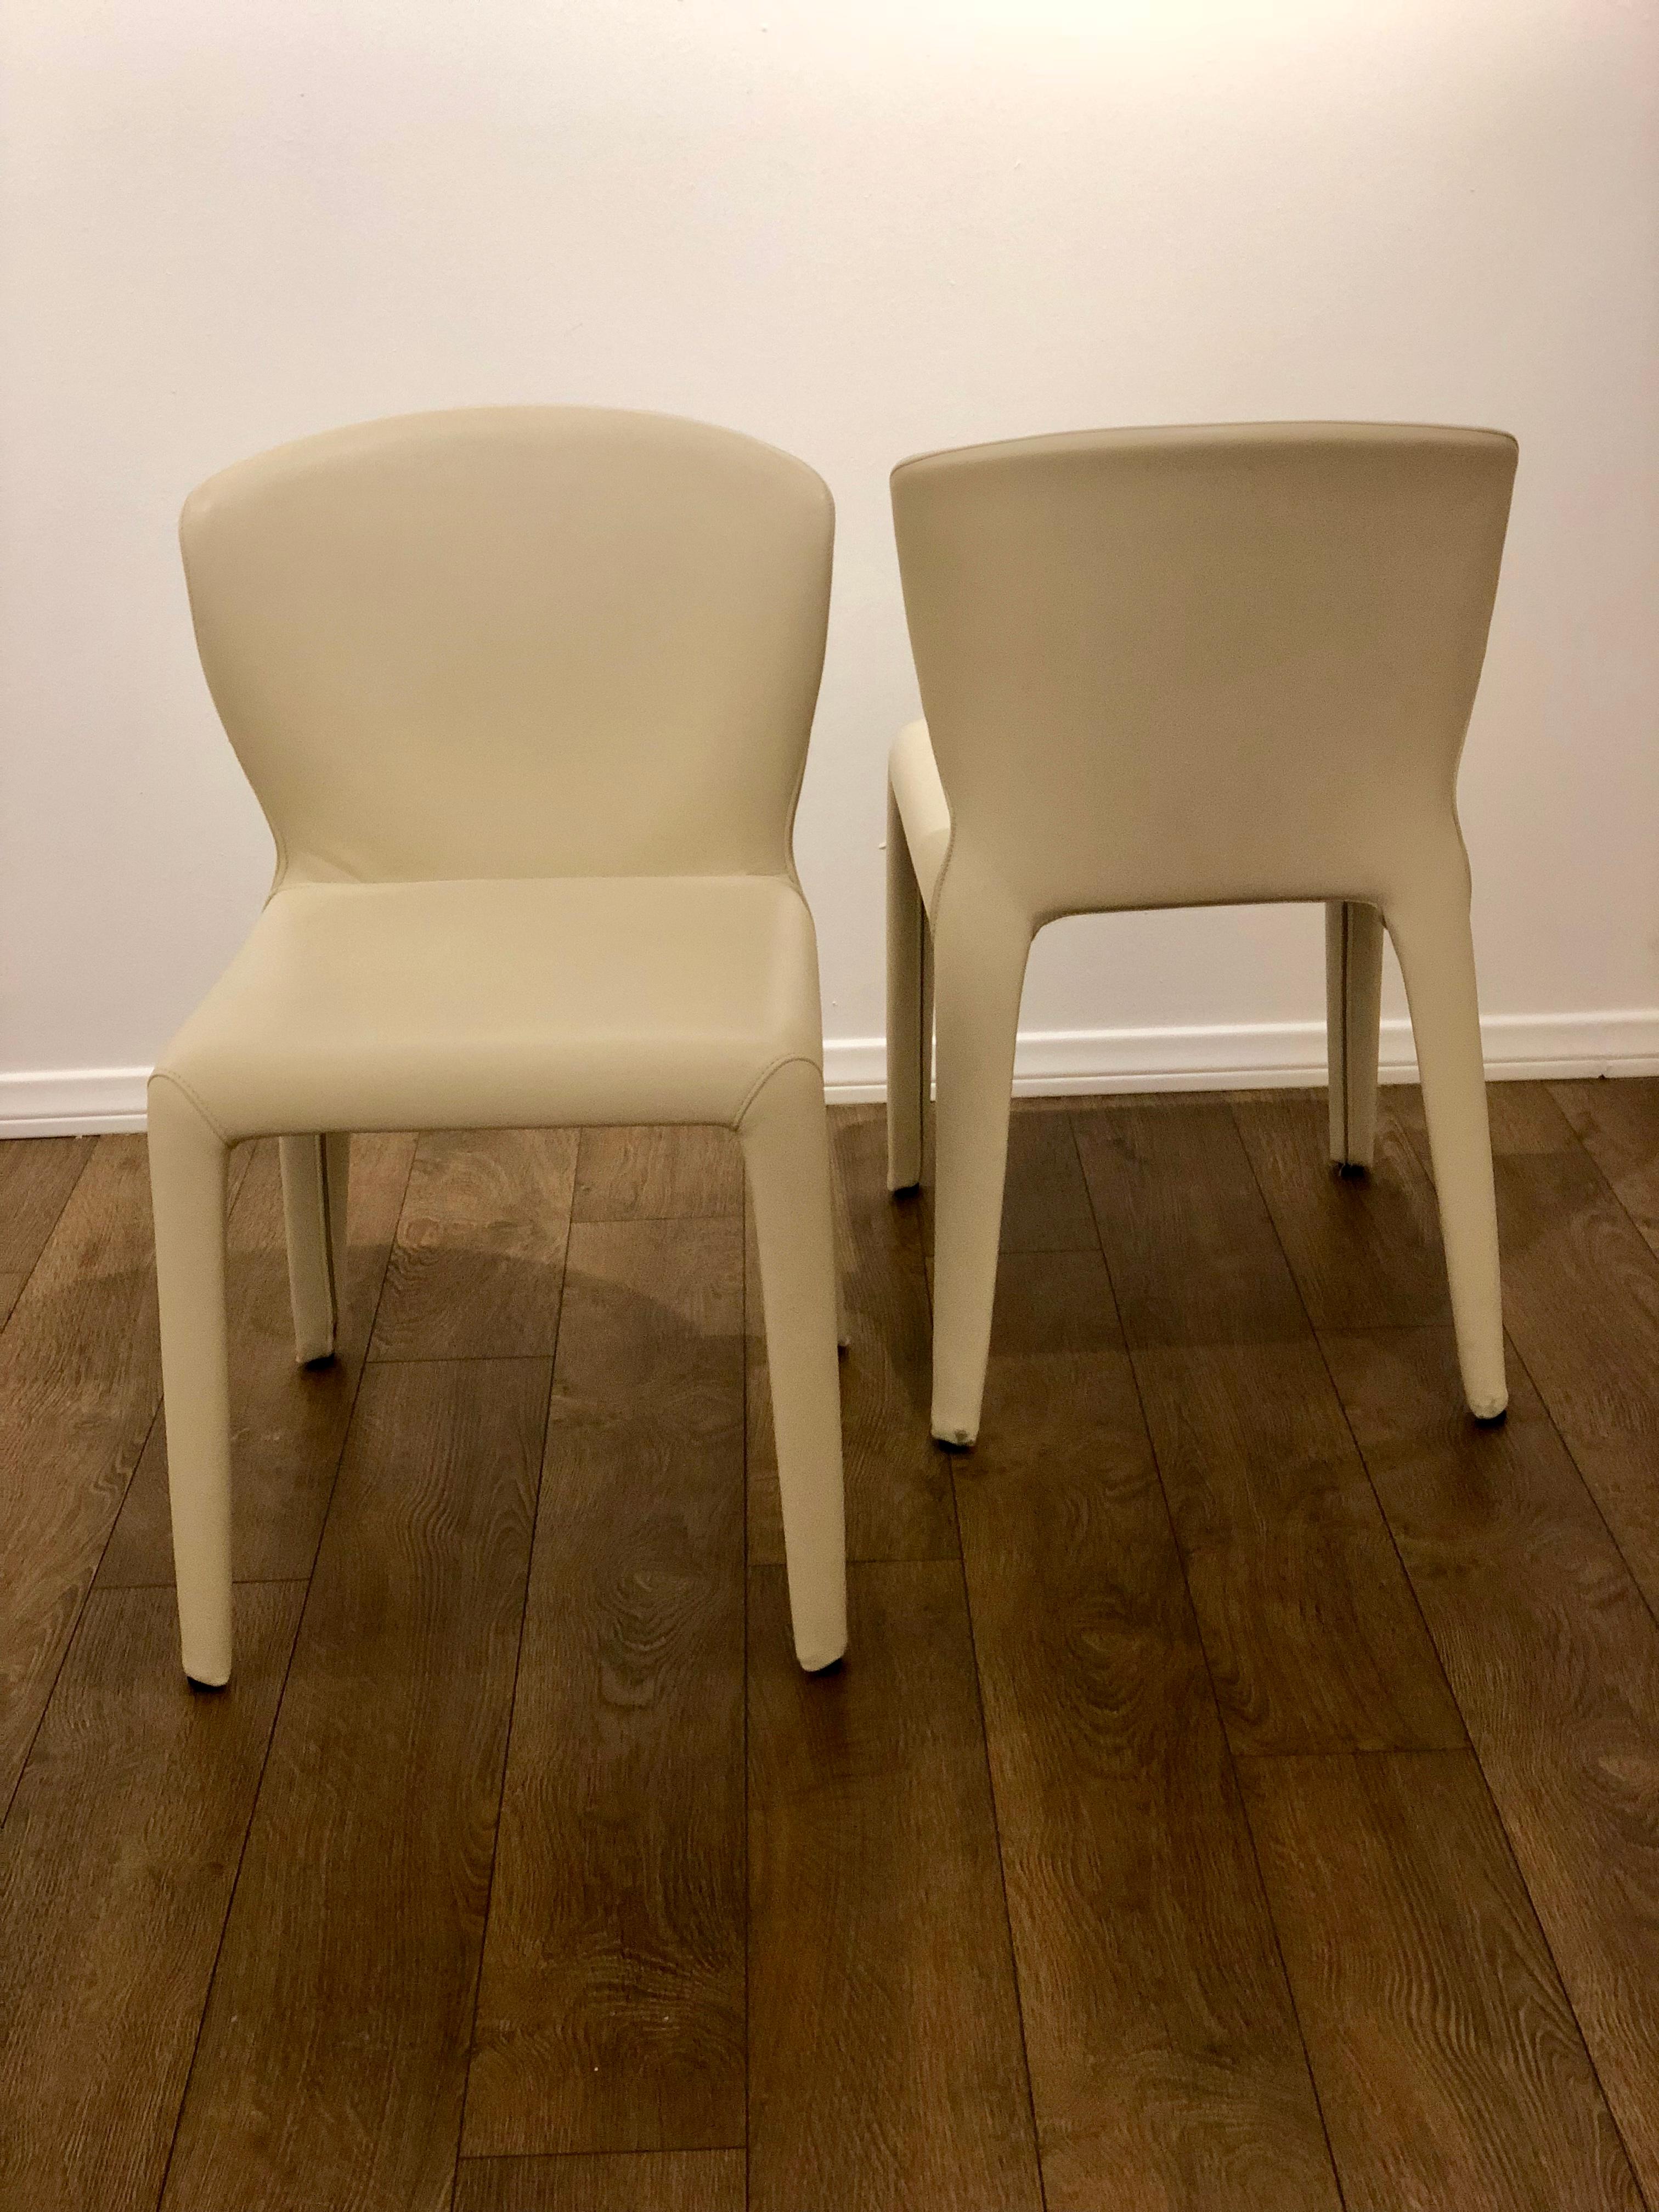 Elegant pair of chairs designed by Hannes Wettstein for Cassina in cream color leather , nice and clean condition , retain its labels beautiful simple design and great quality solid , comfy and sturdy . Made in Italy circa 2000.